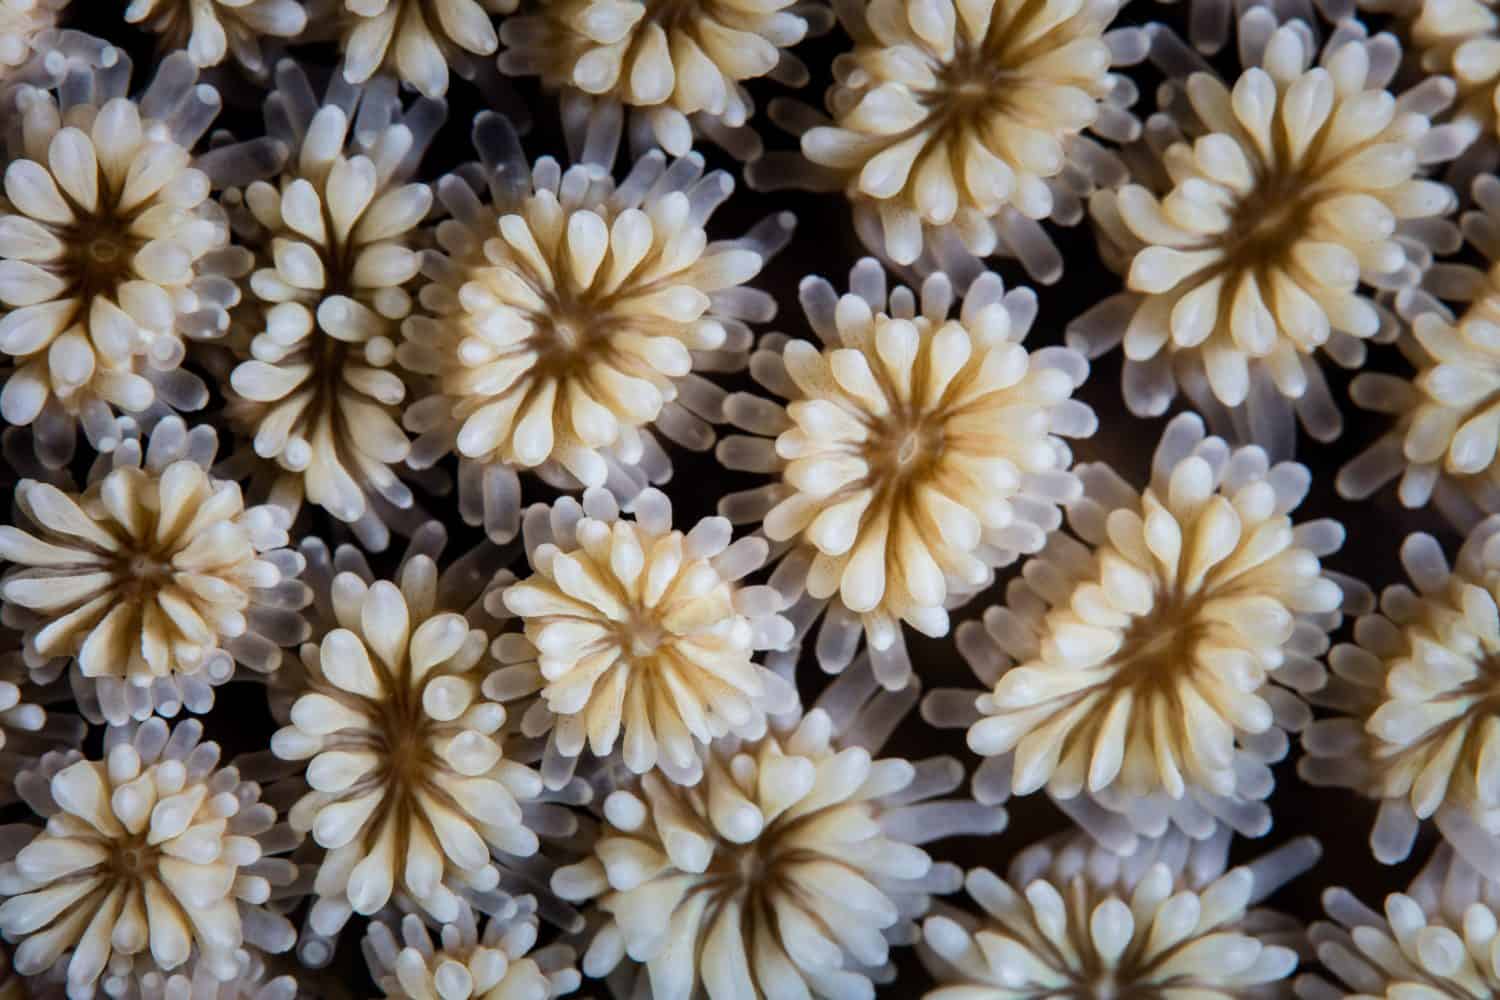 Detail of an Galaxy coral, Galaxea fascicularis, growing on a coral reef in Komodo National Park, Indonesia. This is one of hundreds of reef-building coral species found in the Indo-Pacific region.